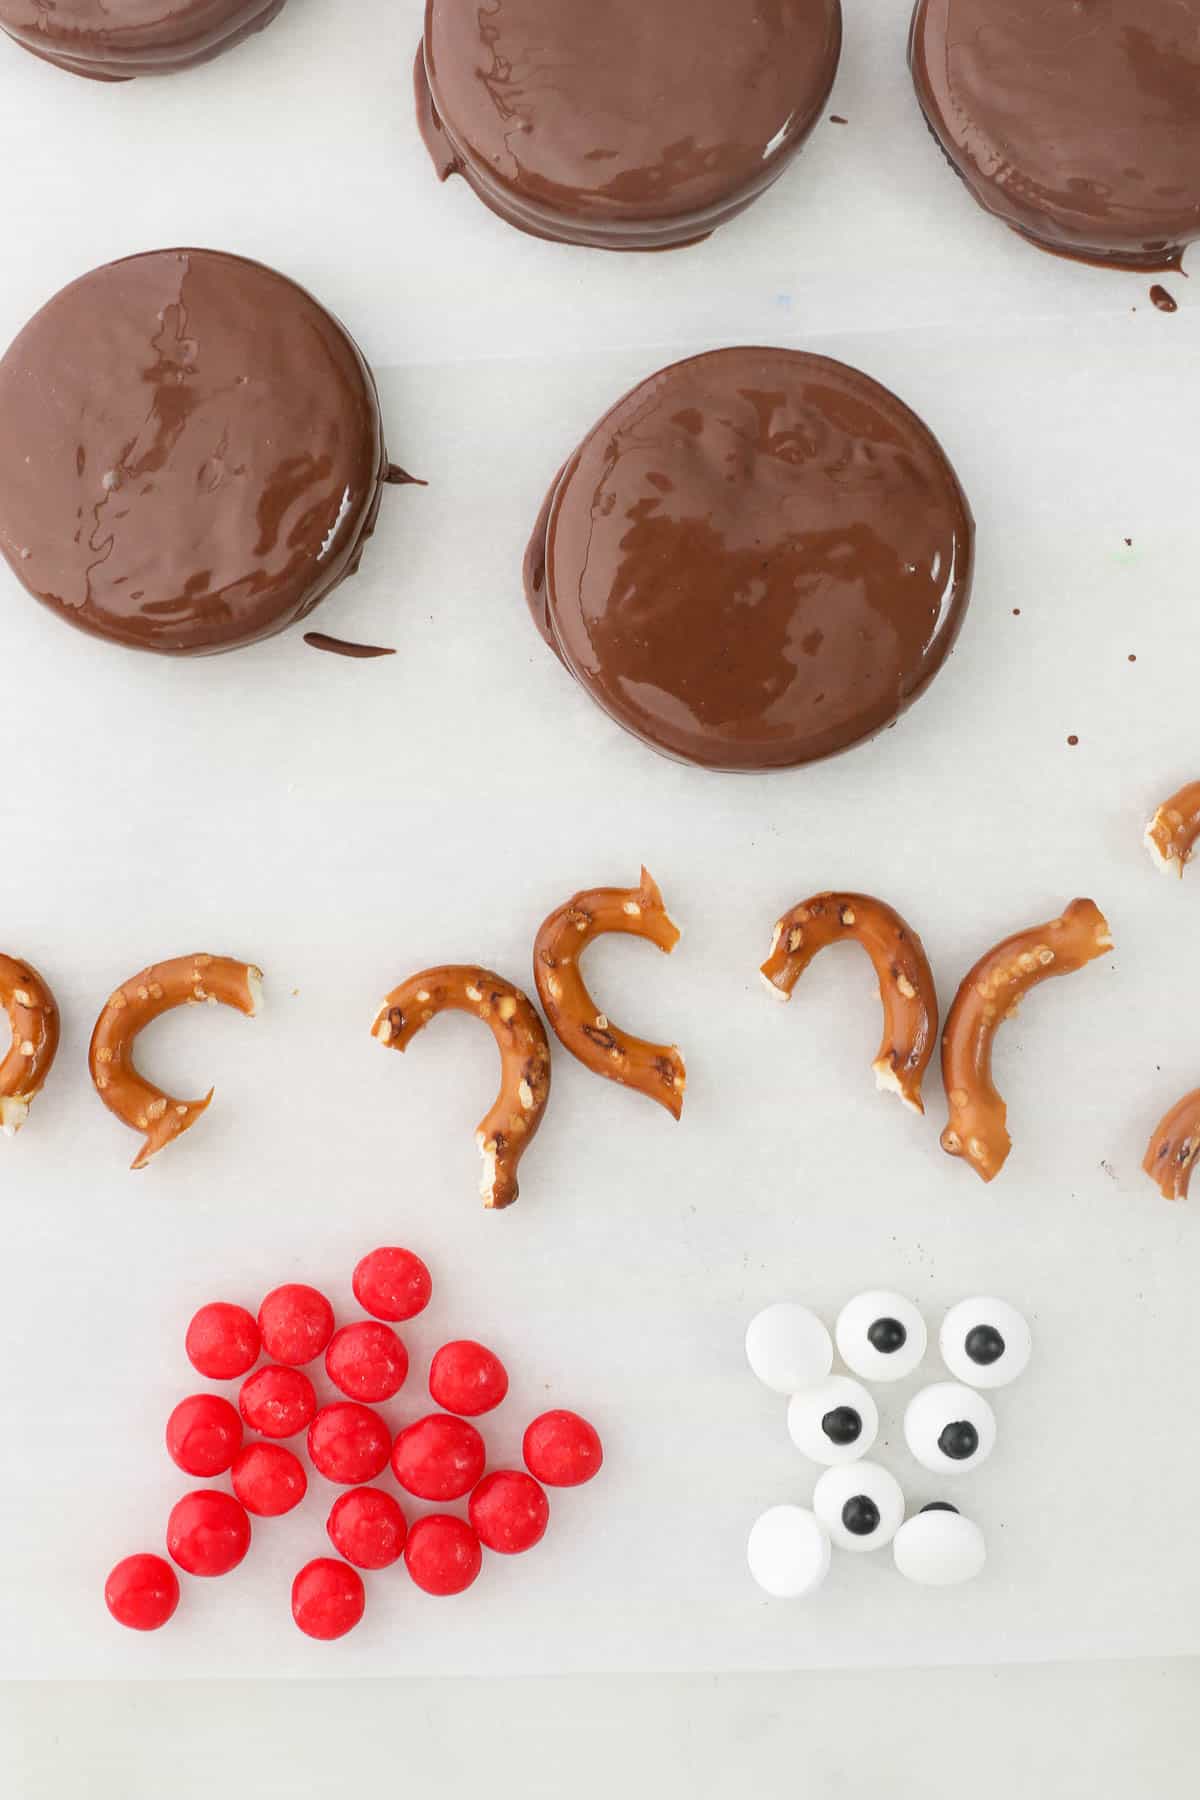 The pretzel antlers, red M&M noses, and candy eyes for Reindeer Christmas Oreos next to chocolate covered Oreos.